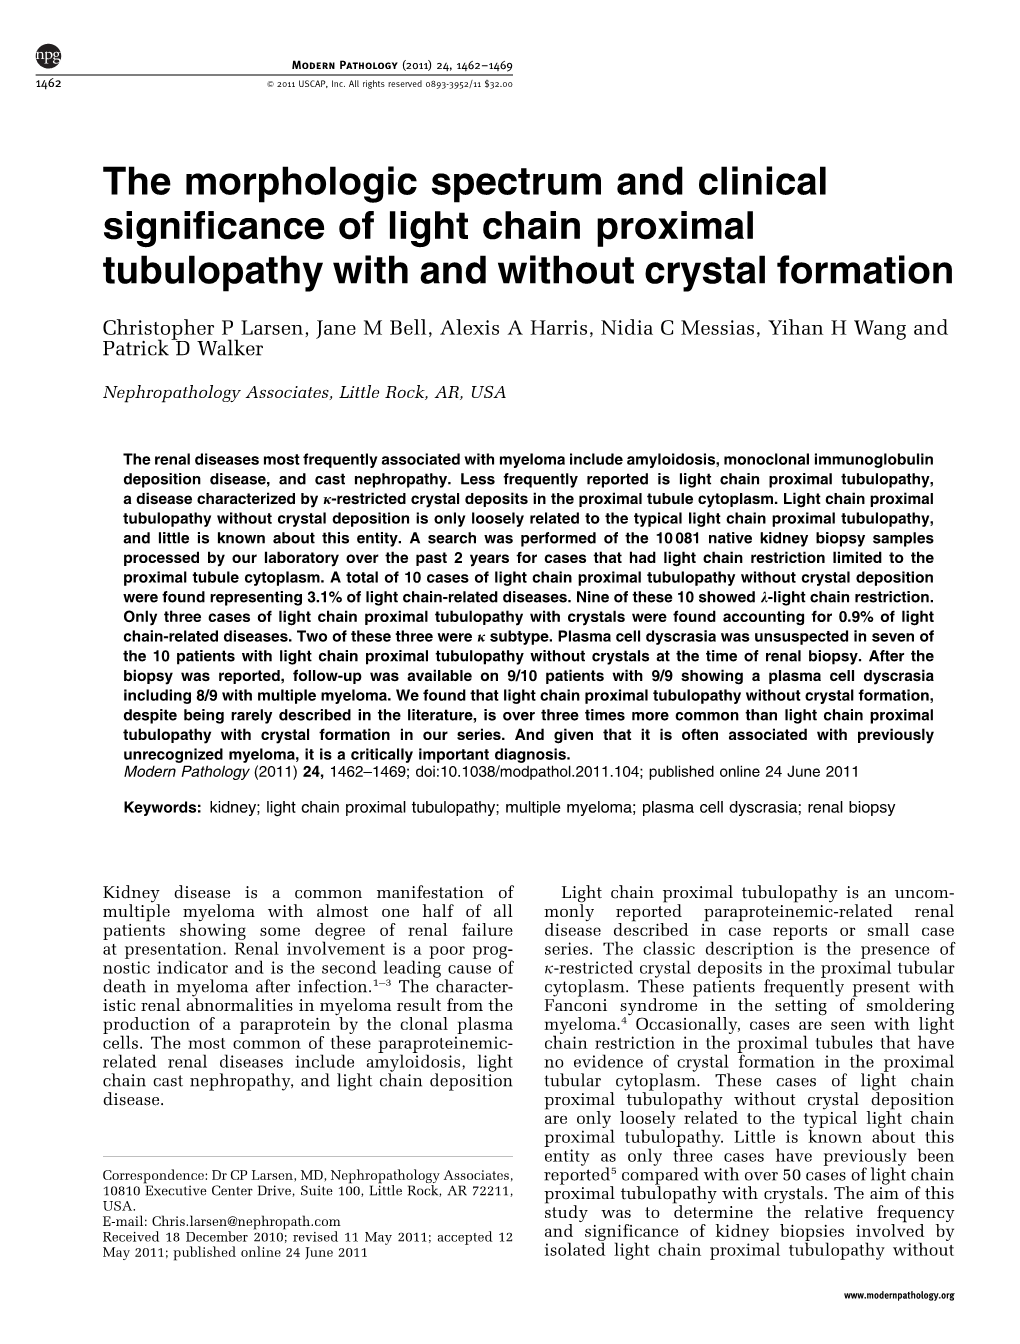 The Morphologic Spectrum and Clinical Significance of Light Chain Proximal Tubulopathy with and Without Crystal Formation